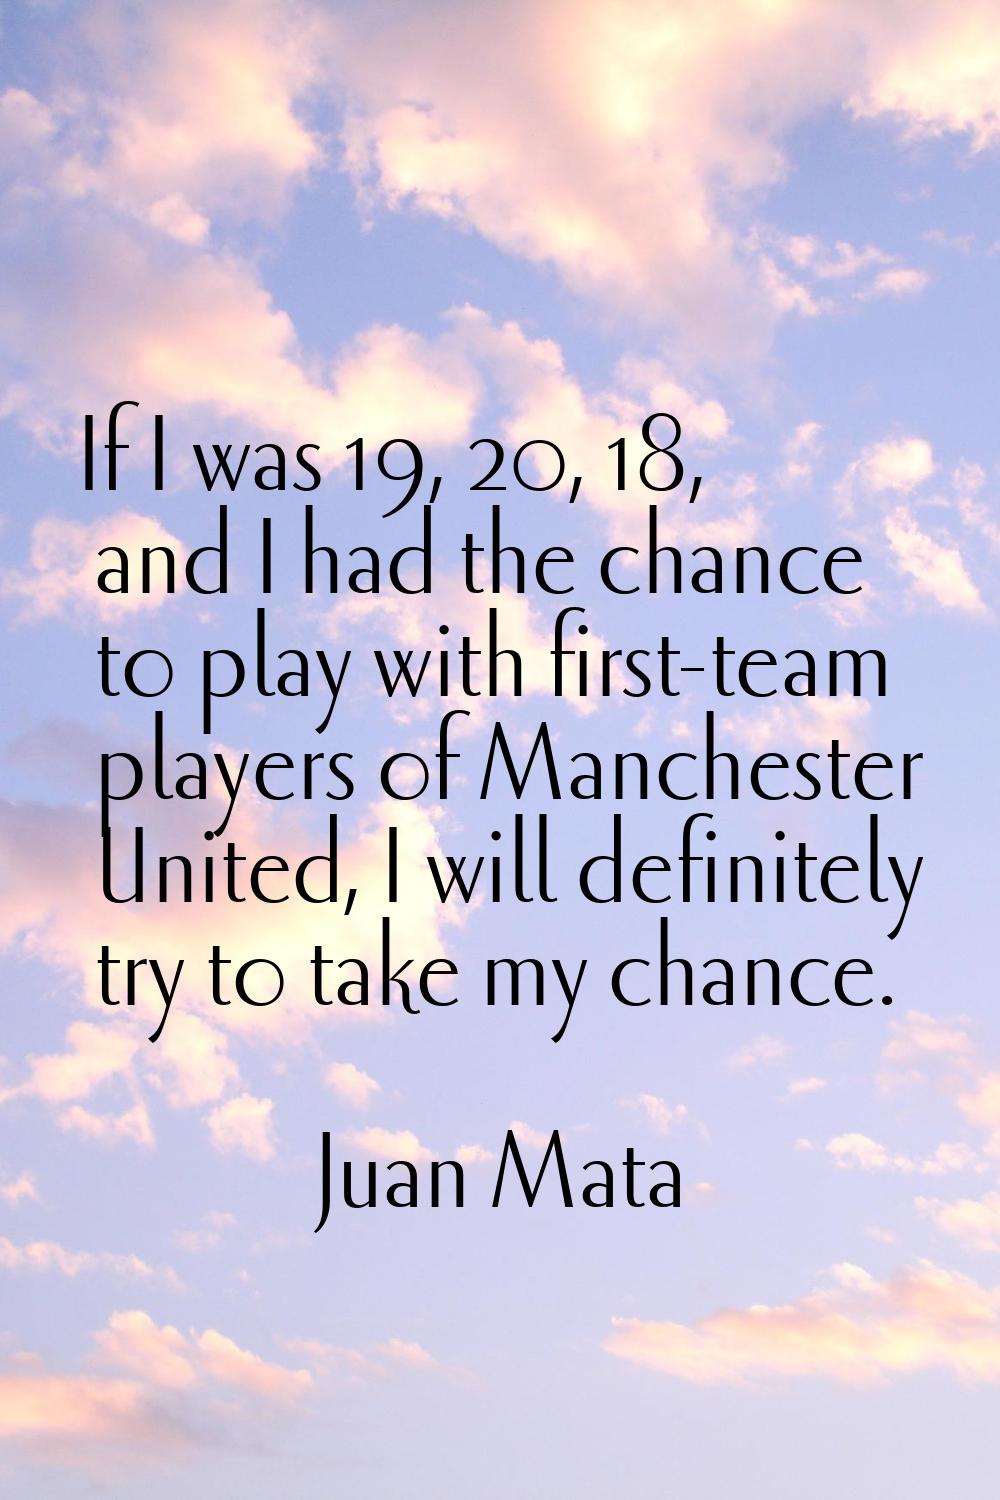 If I was 19, 20, 18, and I had the chance to play with first-team players of Manchester United, I w